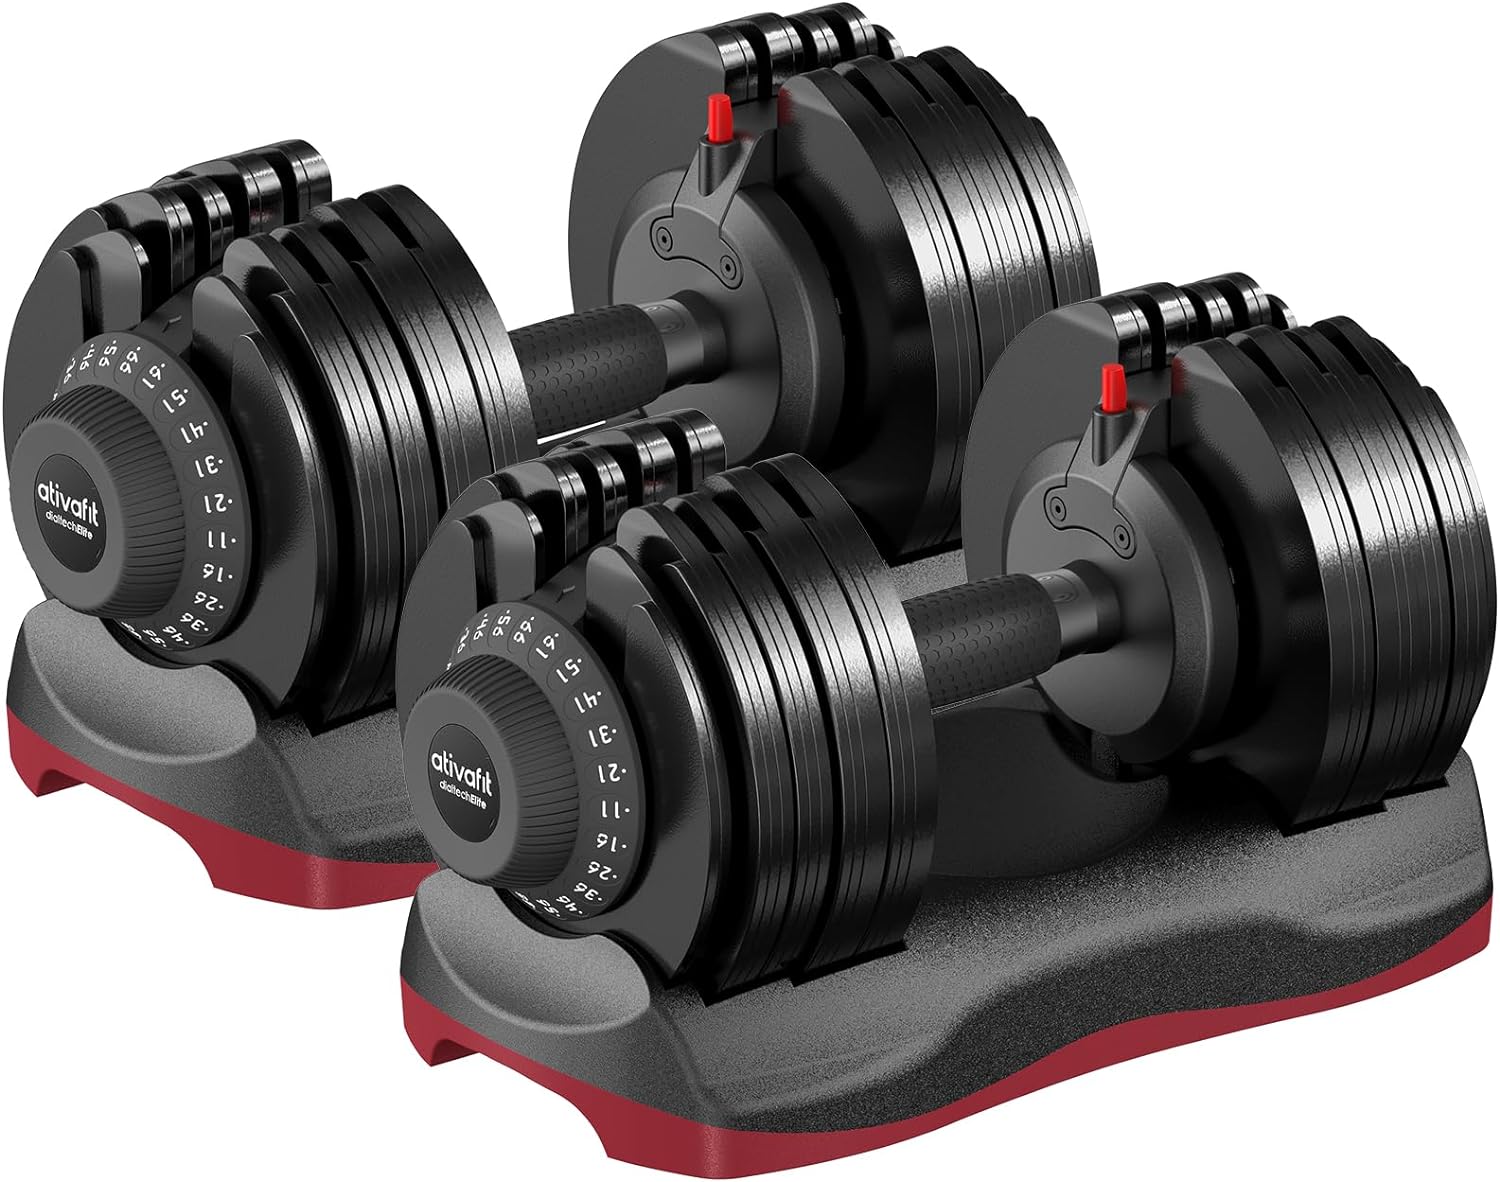 Ativafit 44LBS/66LBS Pair Adjustable Dumbbell Set with Anti-slip Handle 12 In 1 Quick Dial Adjustment Weights With Safety Locking Button Space Saving Strength Training for Full Body Home Gym Workout